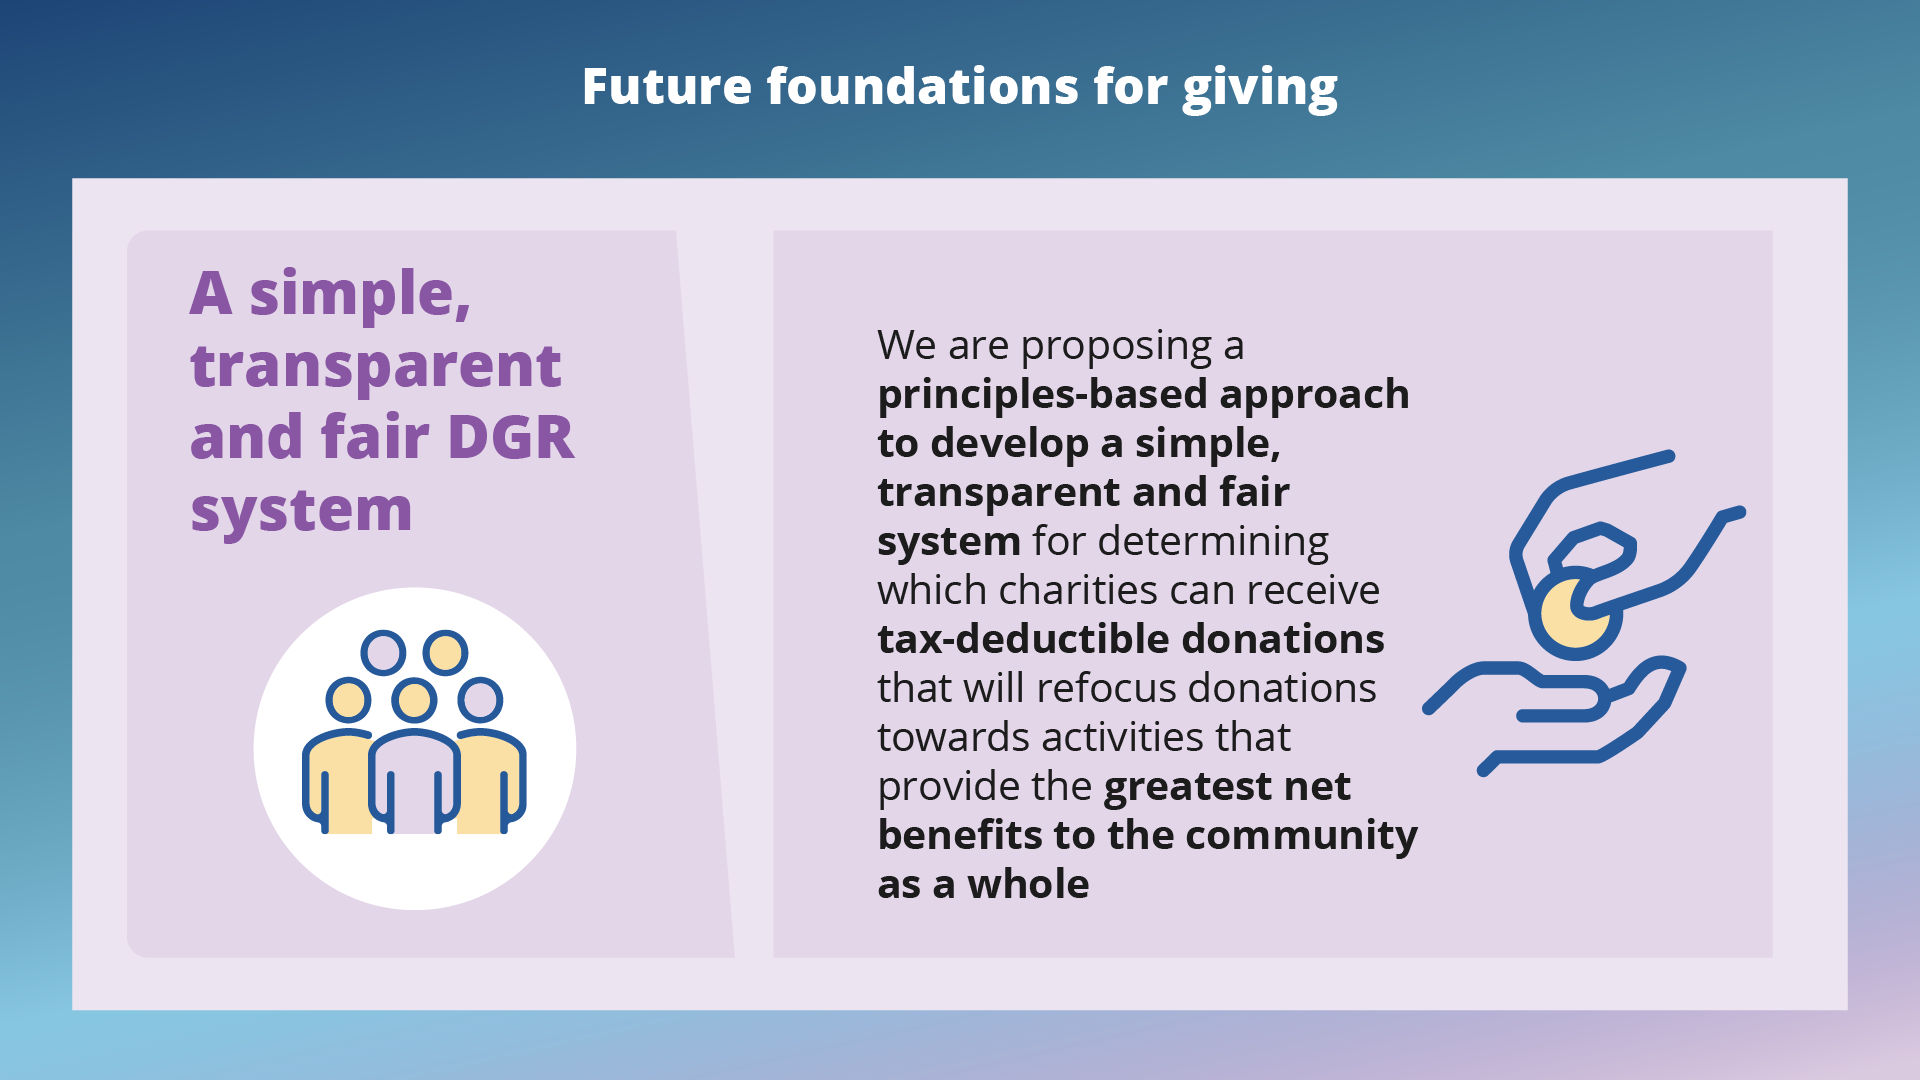 A simple, transparent and fair DGR system. We are proposing a principles-based approach to develop a simple, transparent and fair system for determining which charities can receive tax-deductible donations that will refocus donations towards activities that provide the greatest net benefits to the community as a whole.